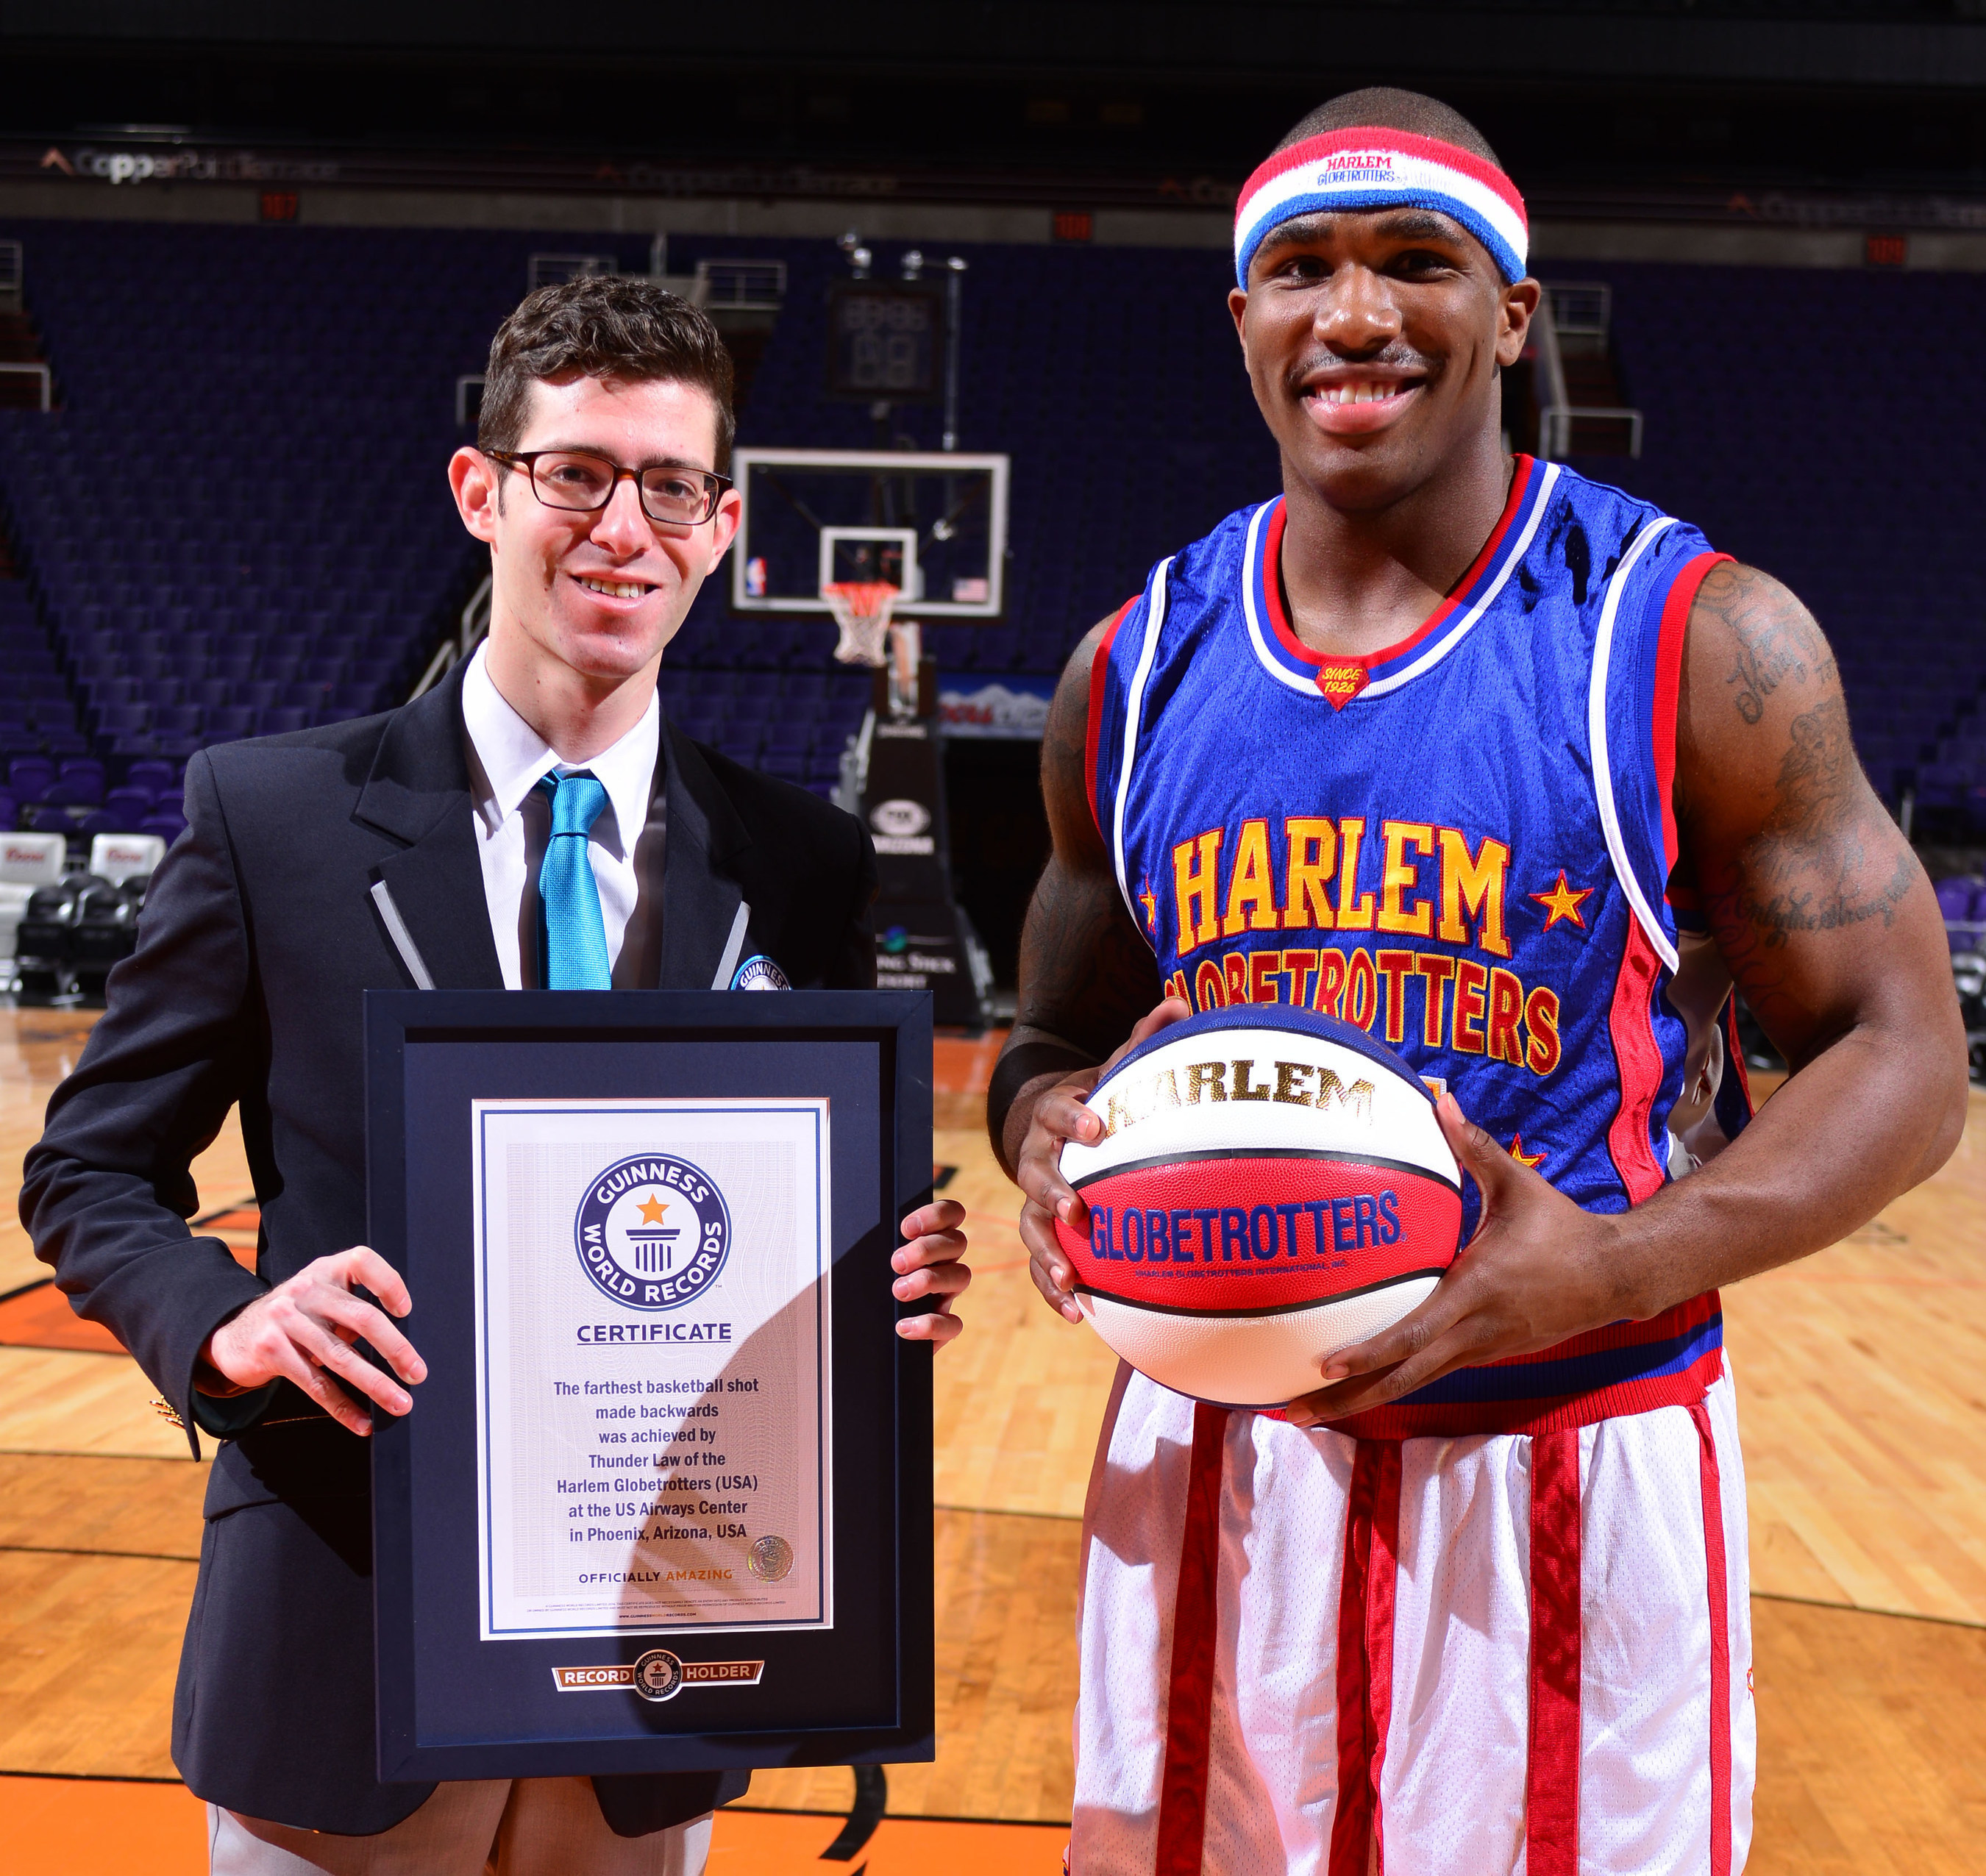 Harlem Globetrotter Thunder Law receives a certificate from Guinness World Records for the  Farthest Basketball Shot Made Backwards - 82 feet 2 inches - in celebration of Guinness World Records Day.